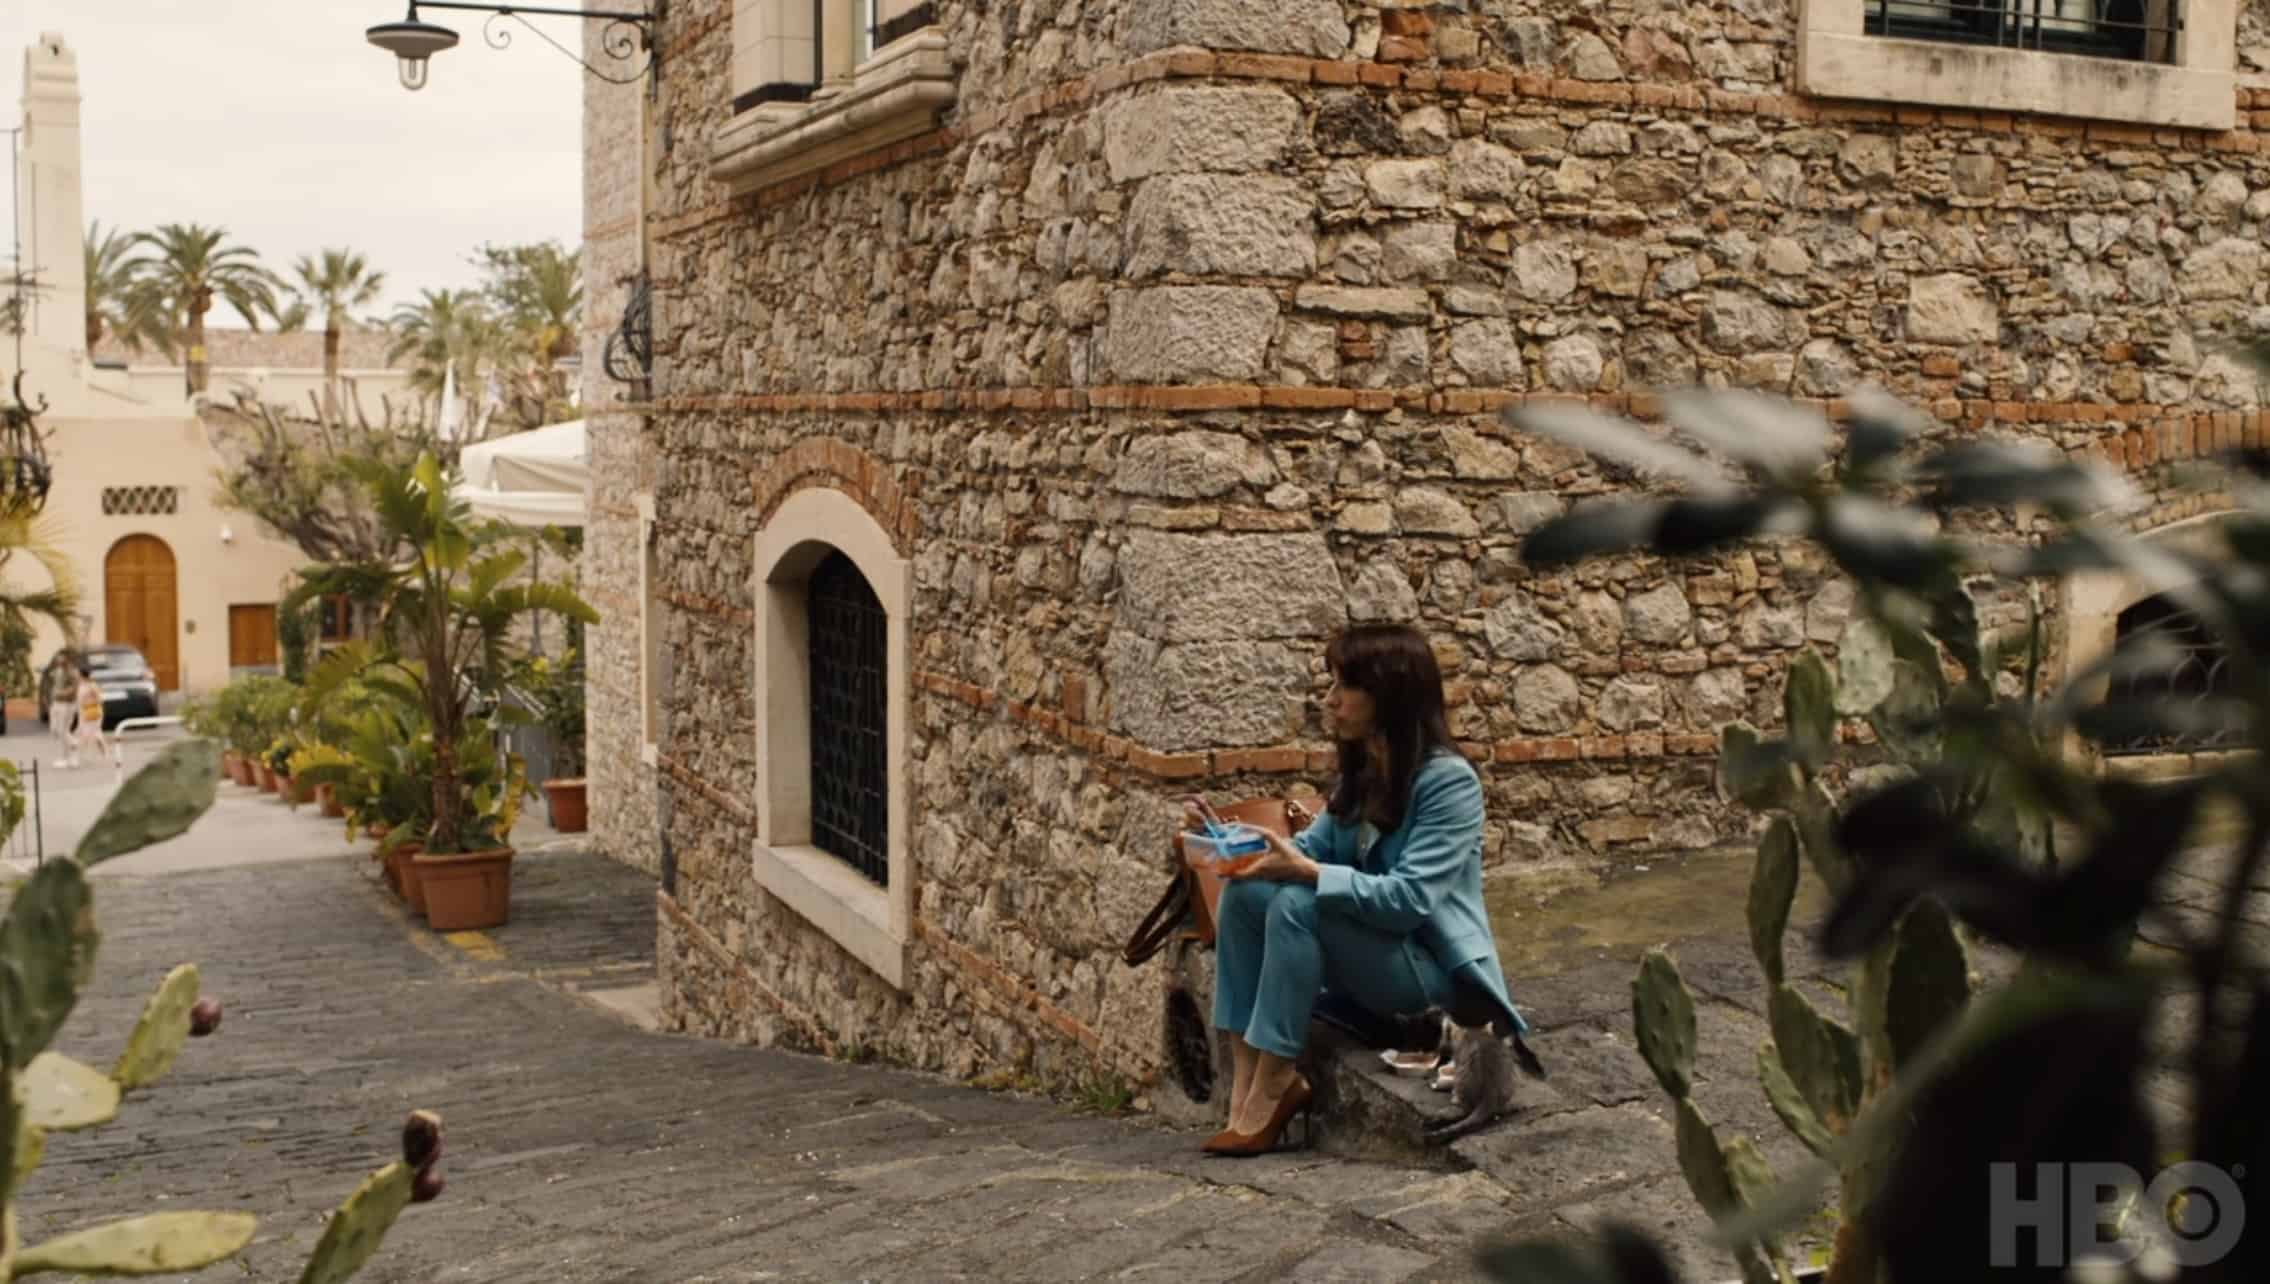 A woman sits on the sidewalk in Sicily in this photo from Rip Cord Productions.